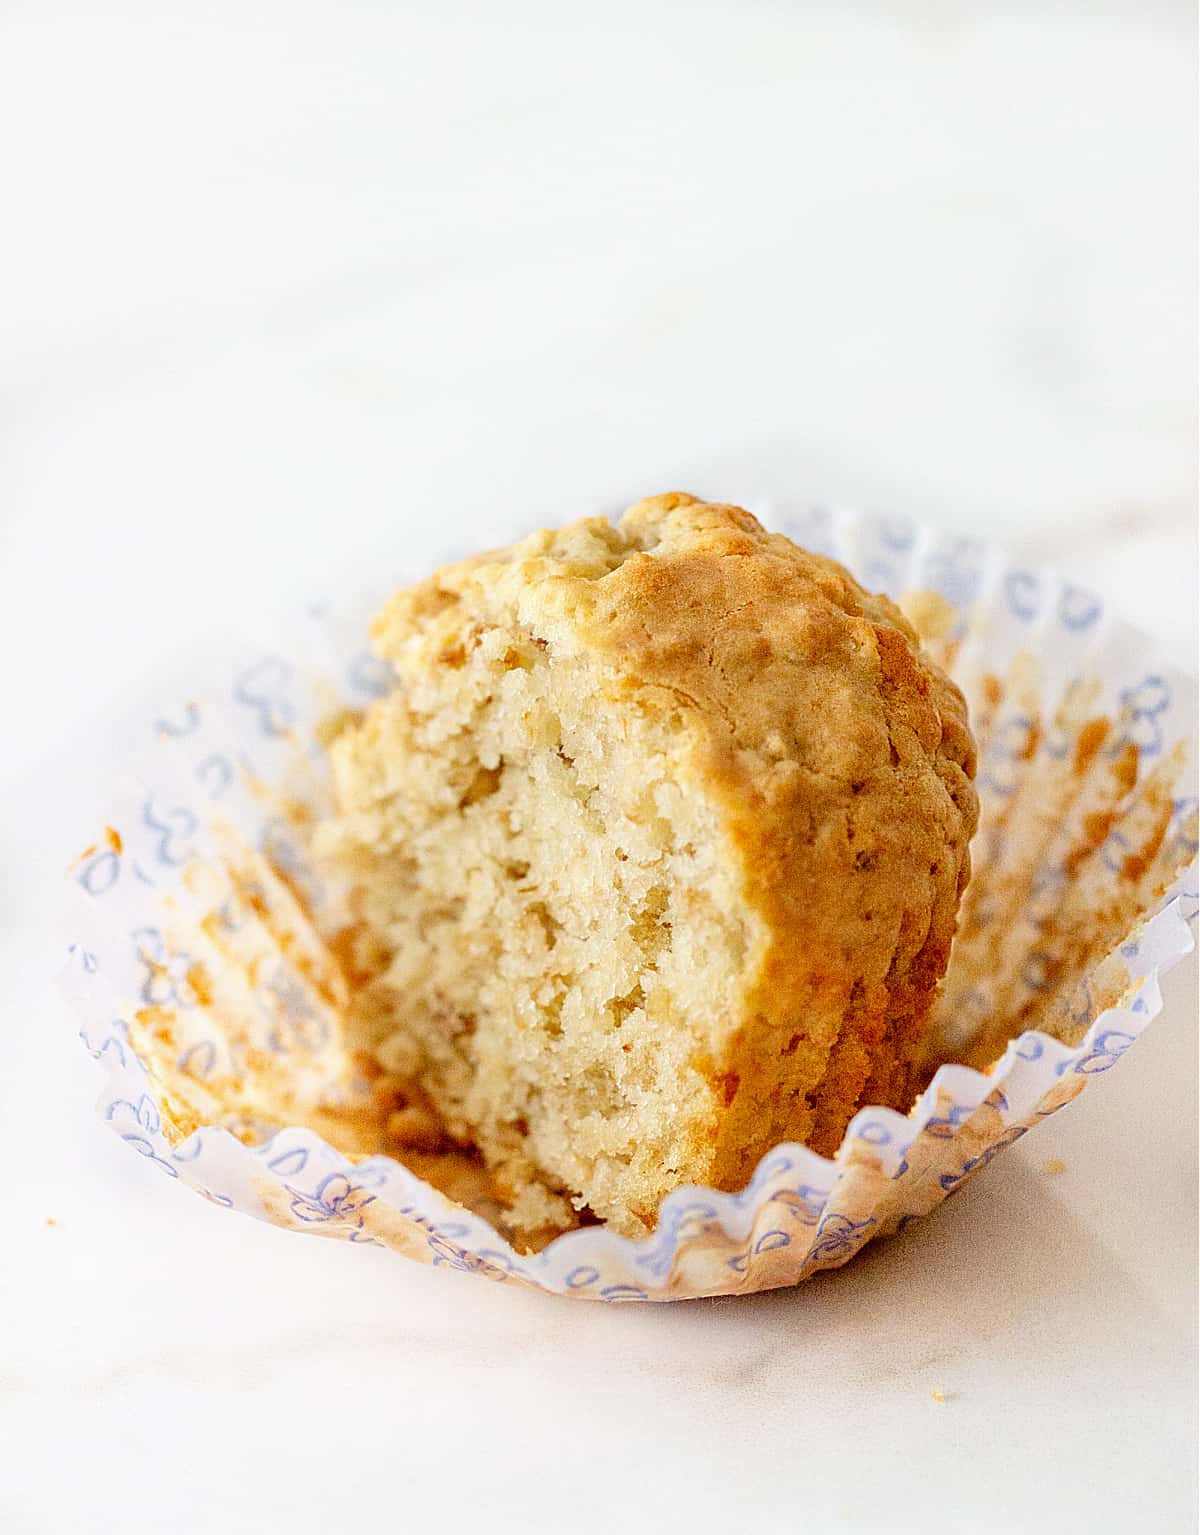 Half oatmeal muffin in light colored paper cup, white marble surface